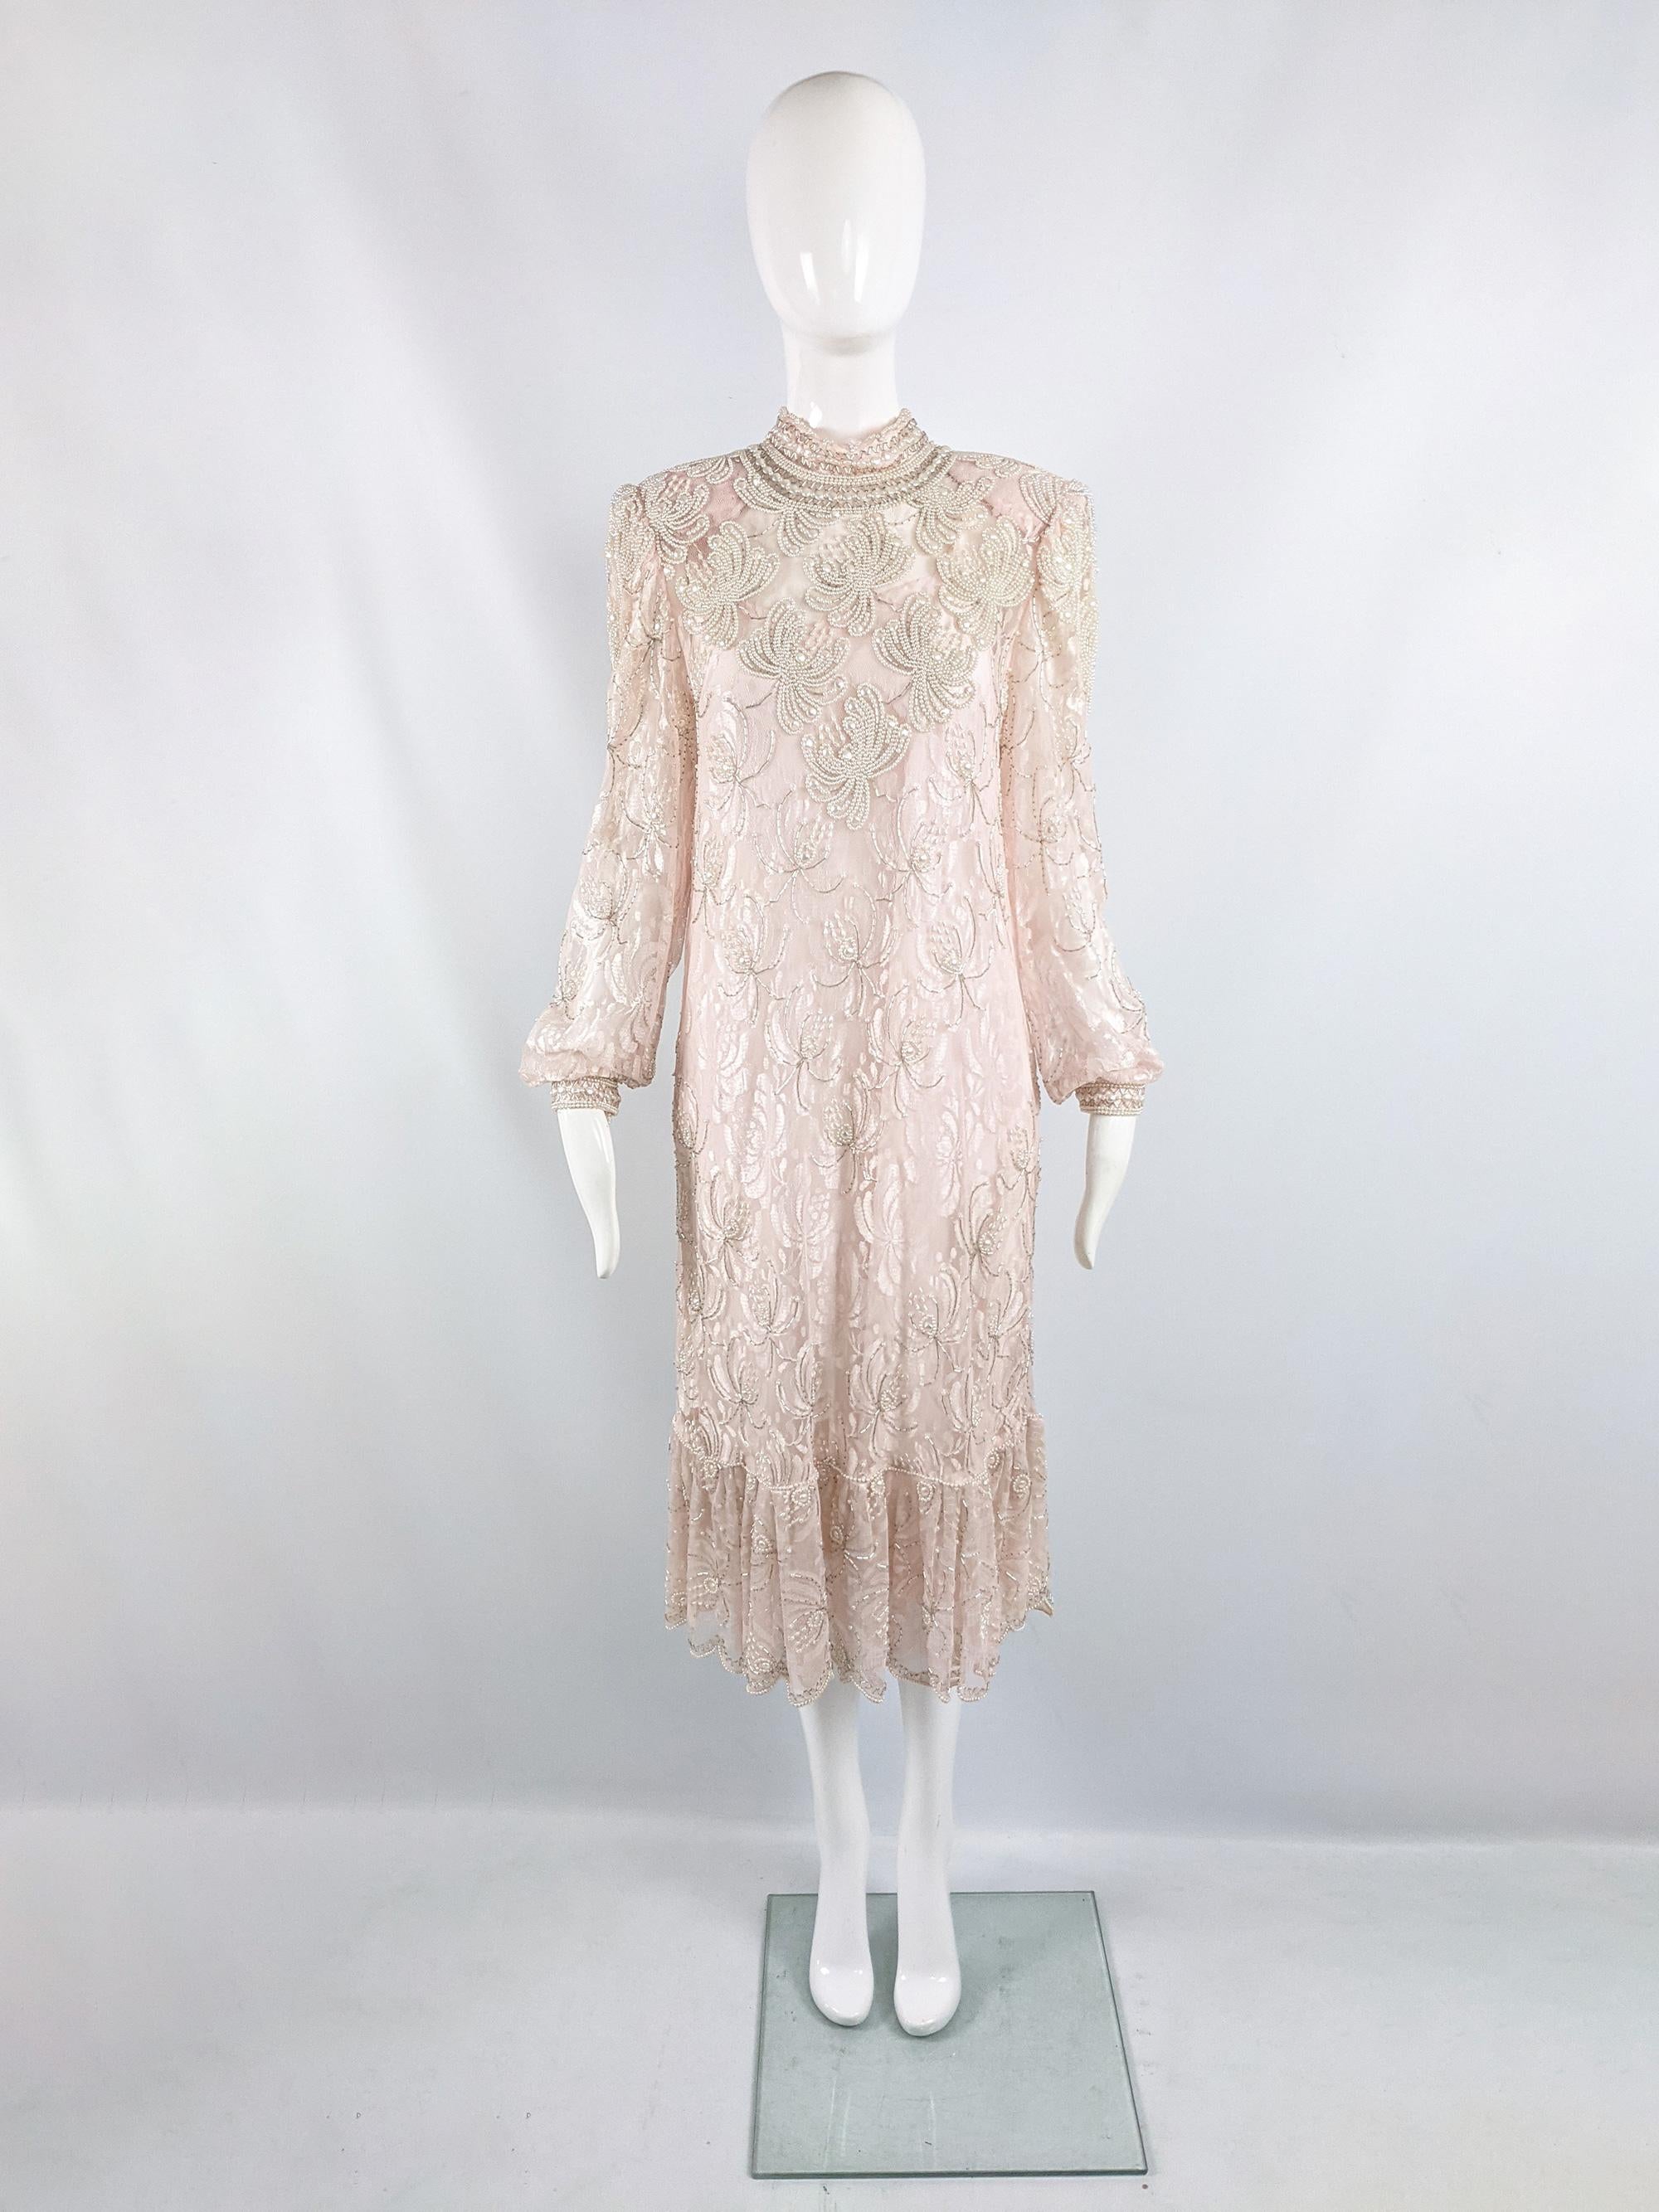 A fabulous vintage womens dress from the 80s in a pink sheer lace, heavily embellished with beads and faux pearls. It comes with a lightweight, sleeveless slip dress. It has structured shoulder pads, a loose fit and a mock neck. 

Size: Unlabelled;